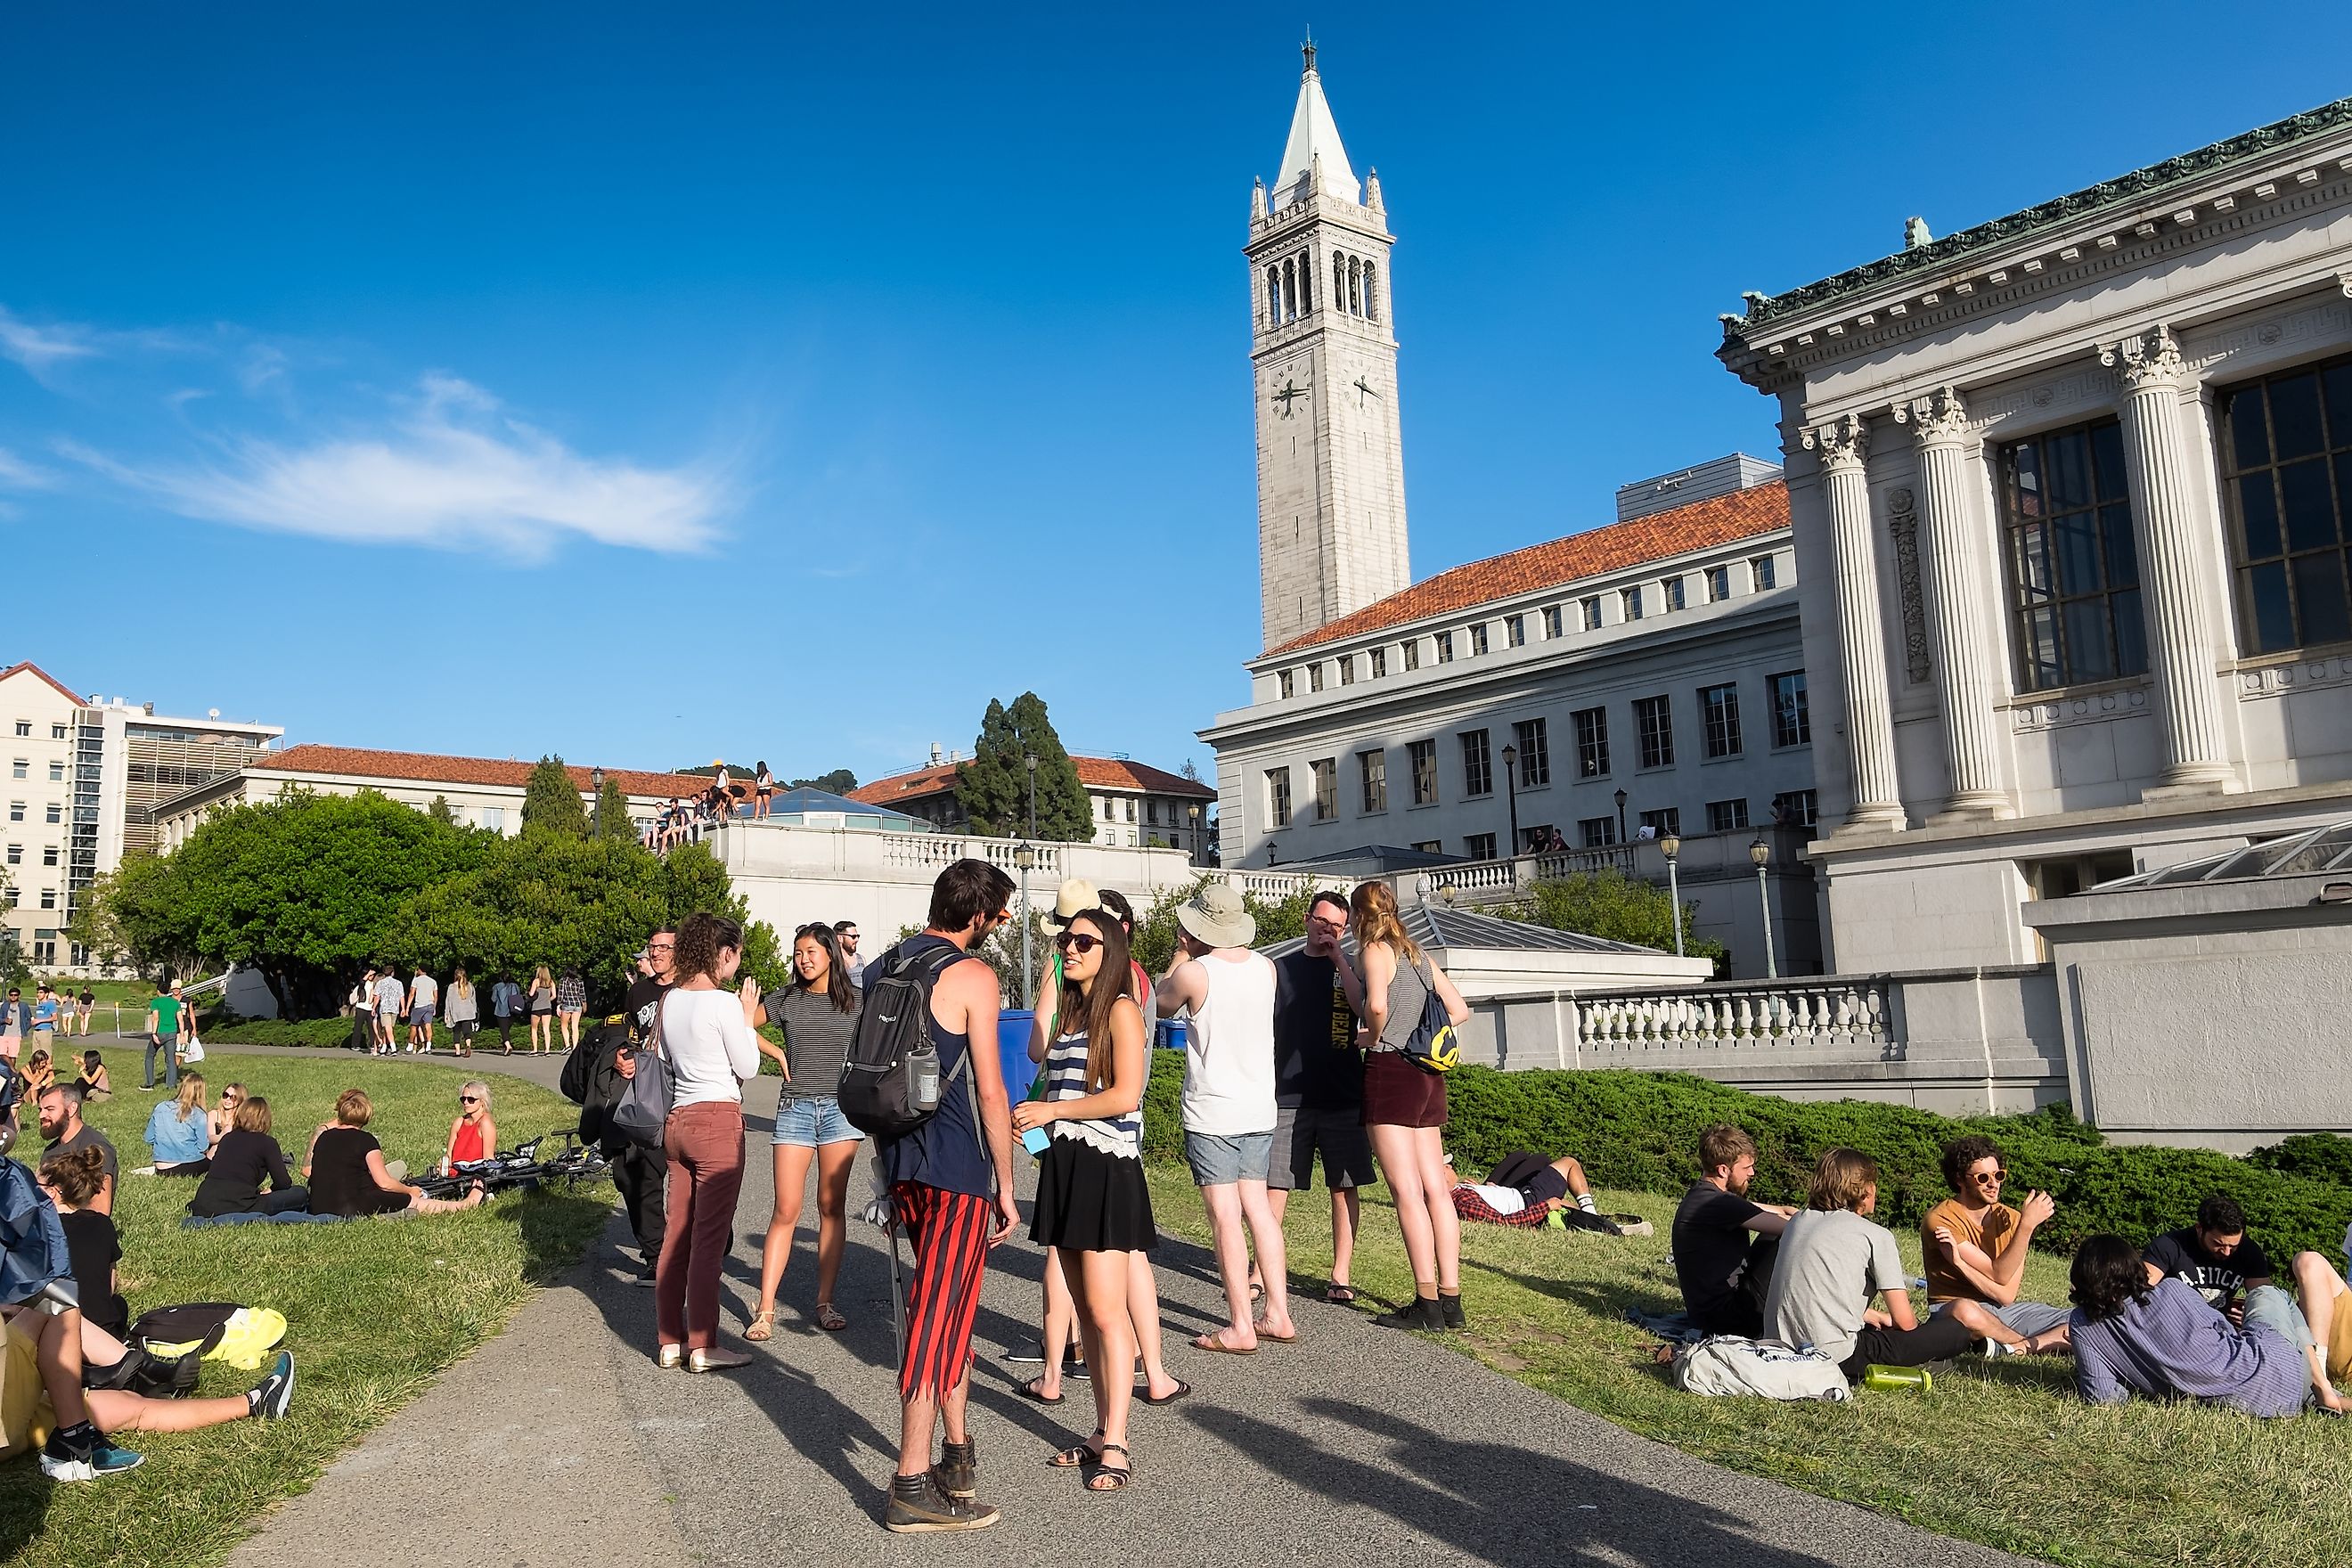 tudents at the University of California Berkeley campus enjoying a warm spring day outdoors on the grass. The Campanile tower is seen in the background.